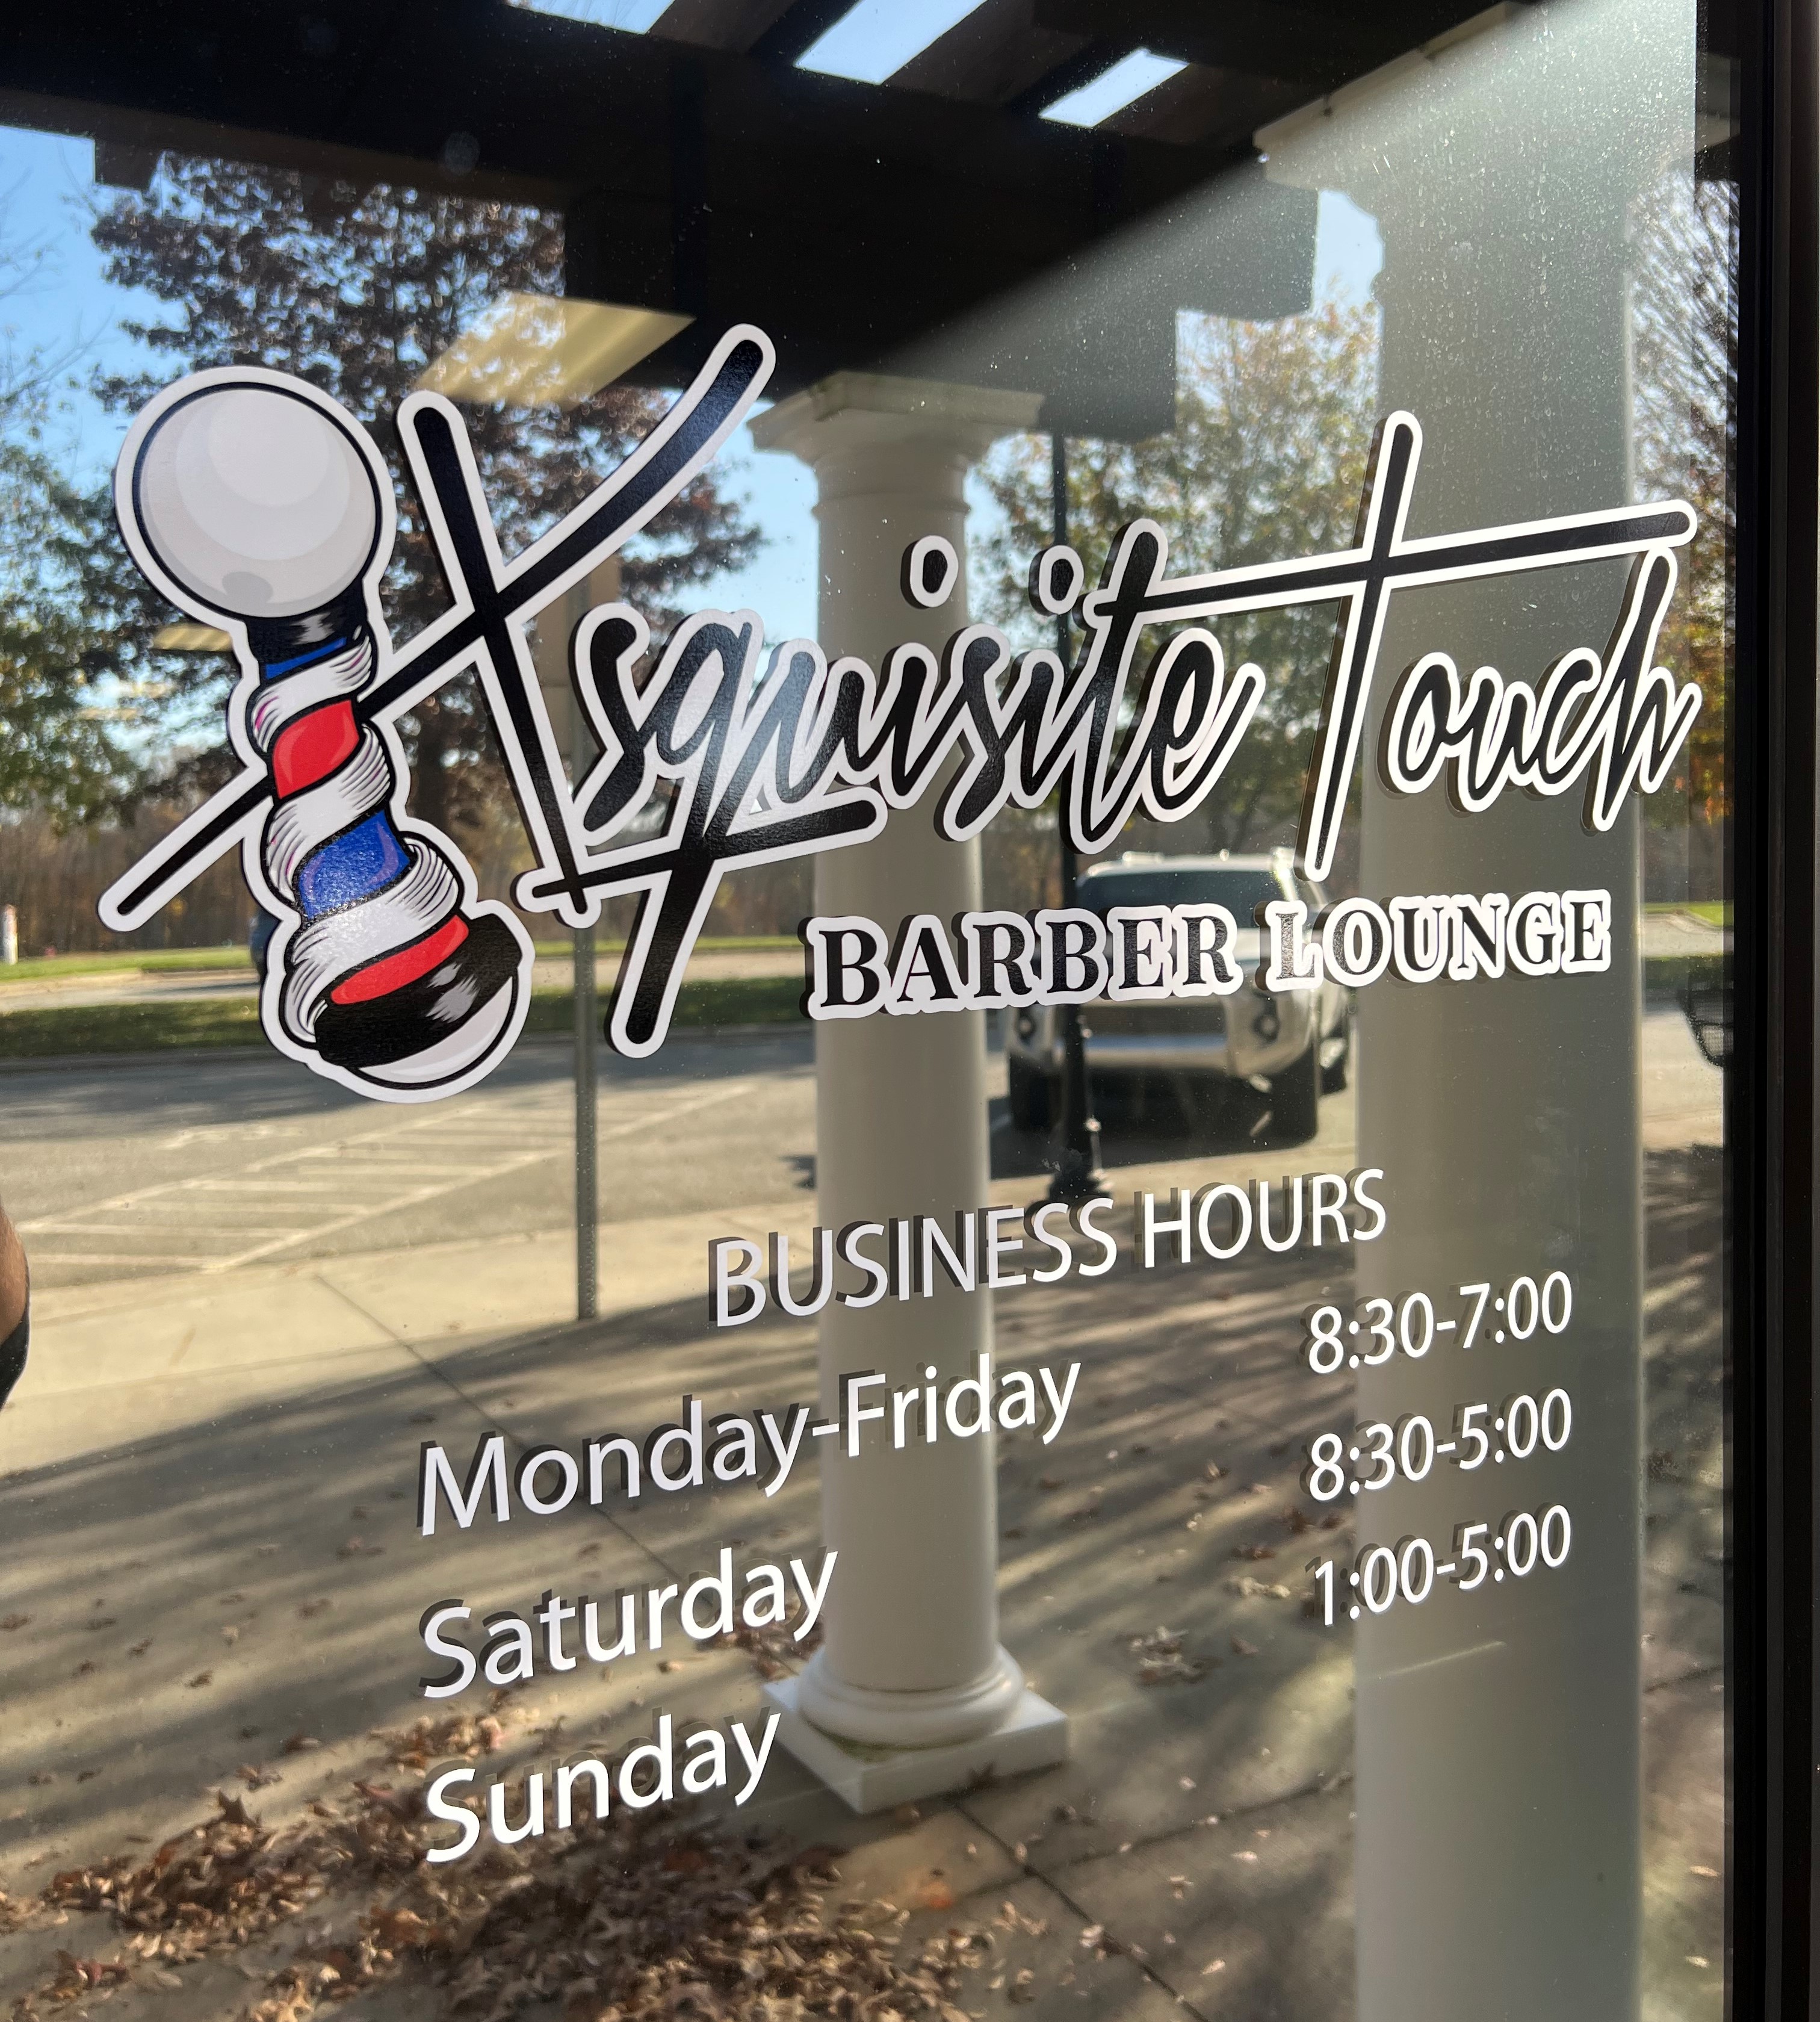 commercial window tinting